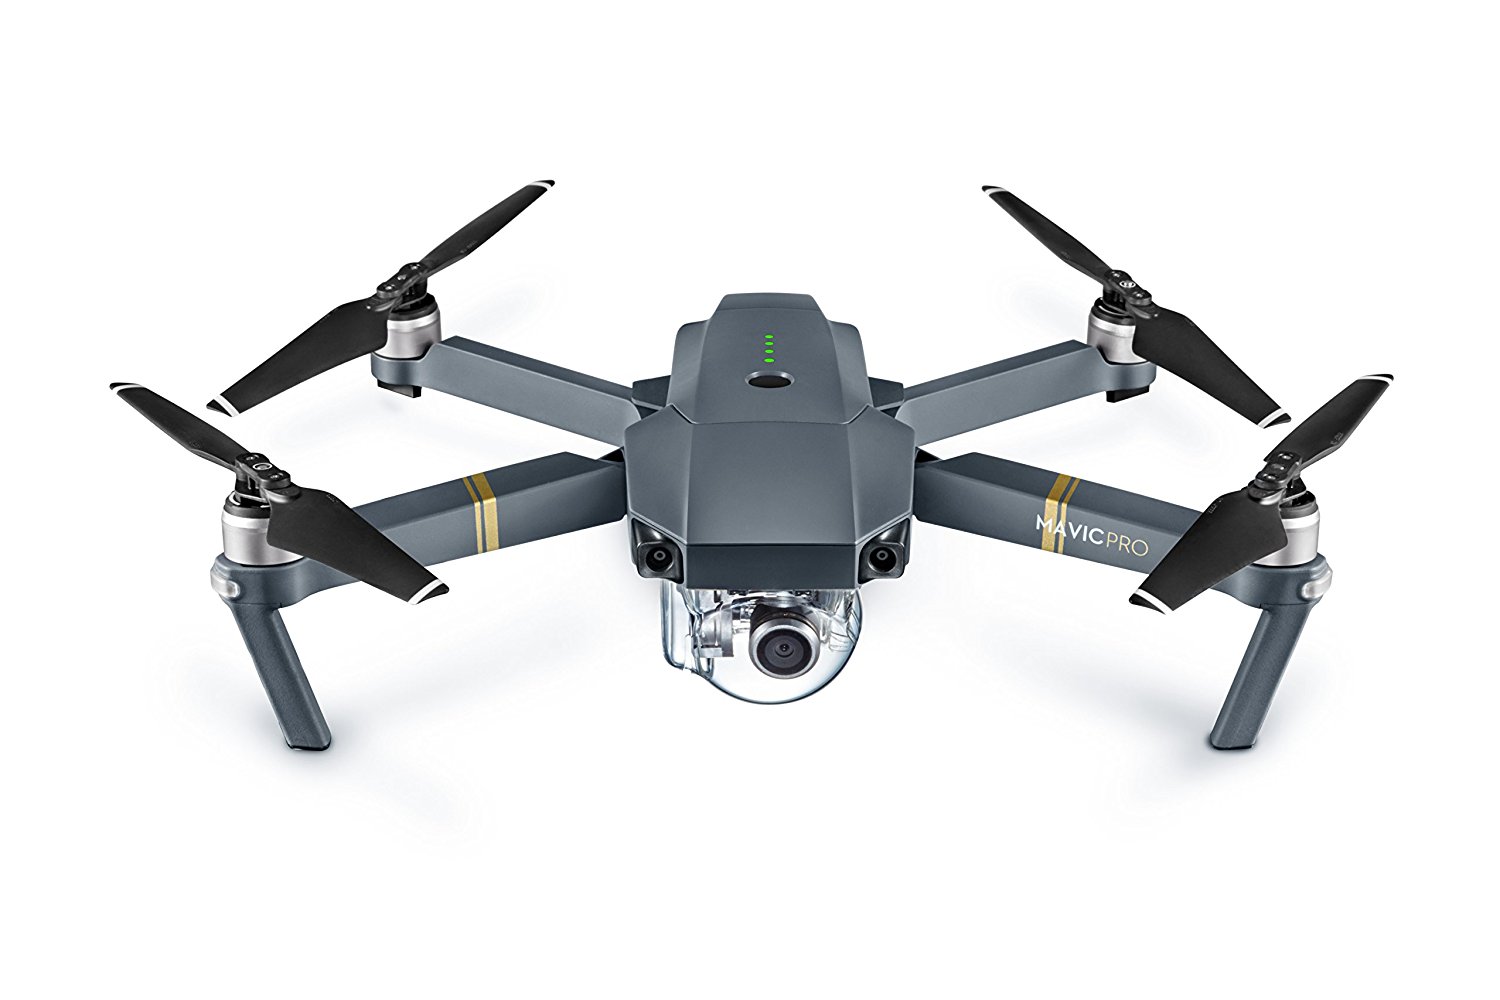 dji mavic pro drone, best drones for video, best drone action camera